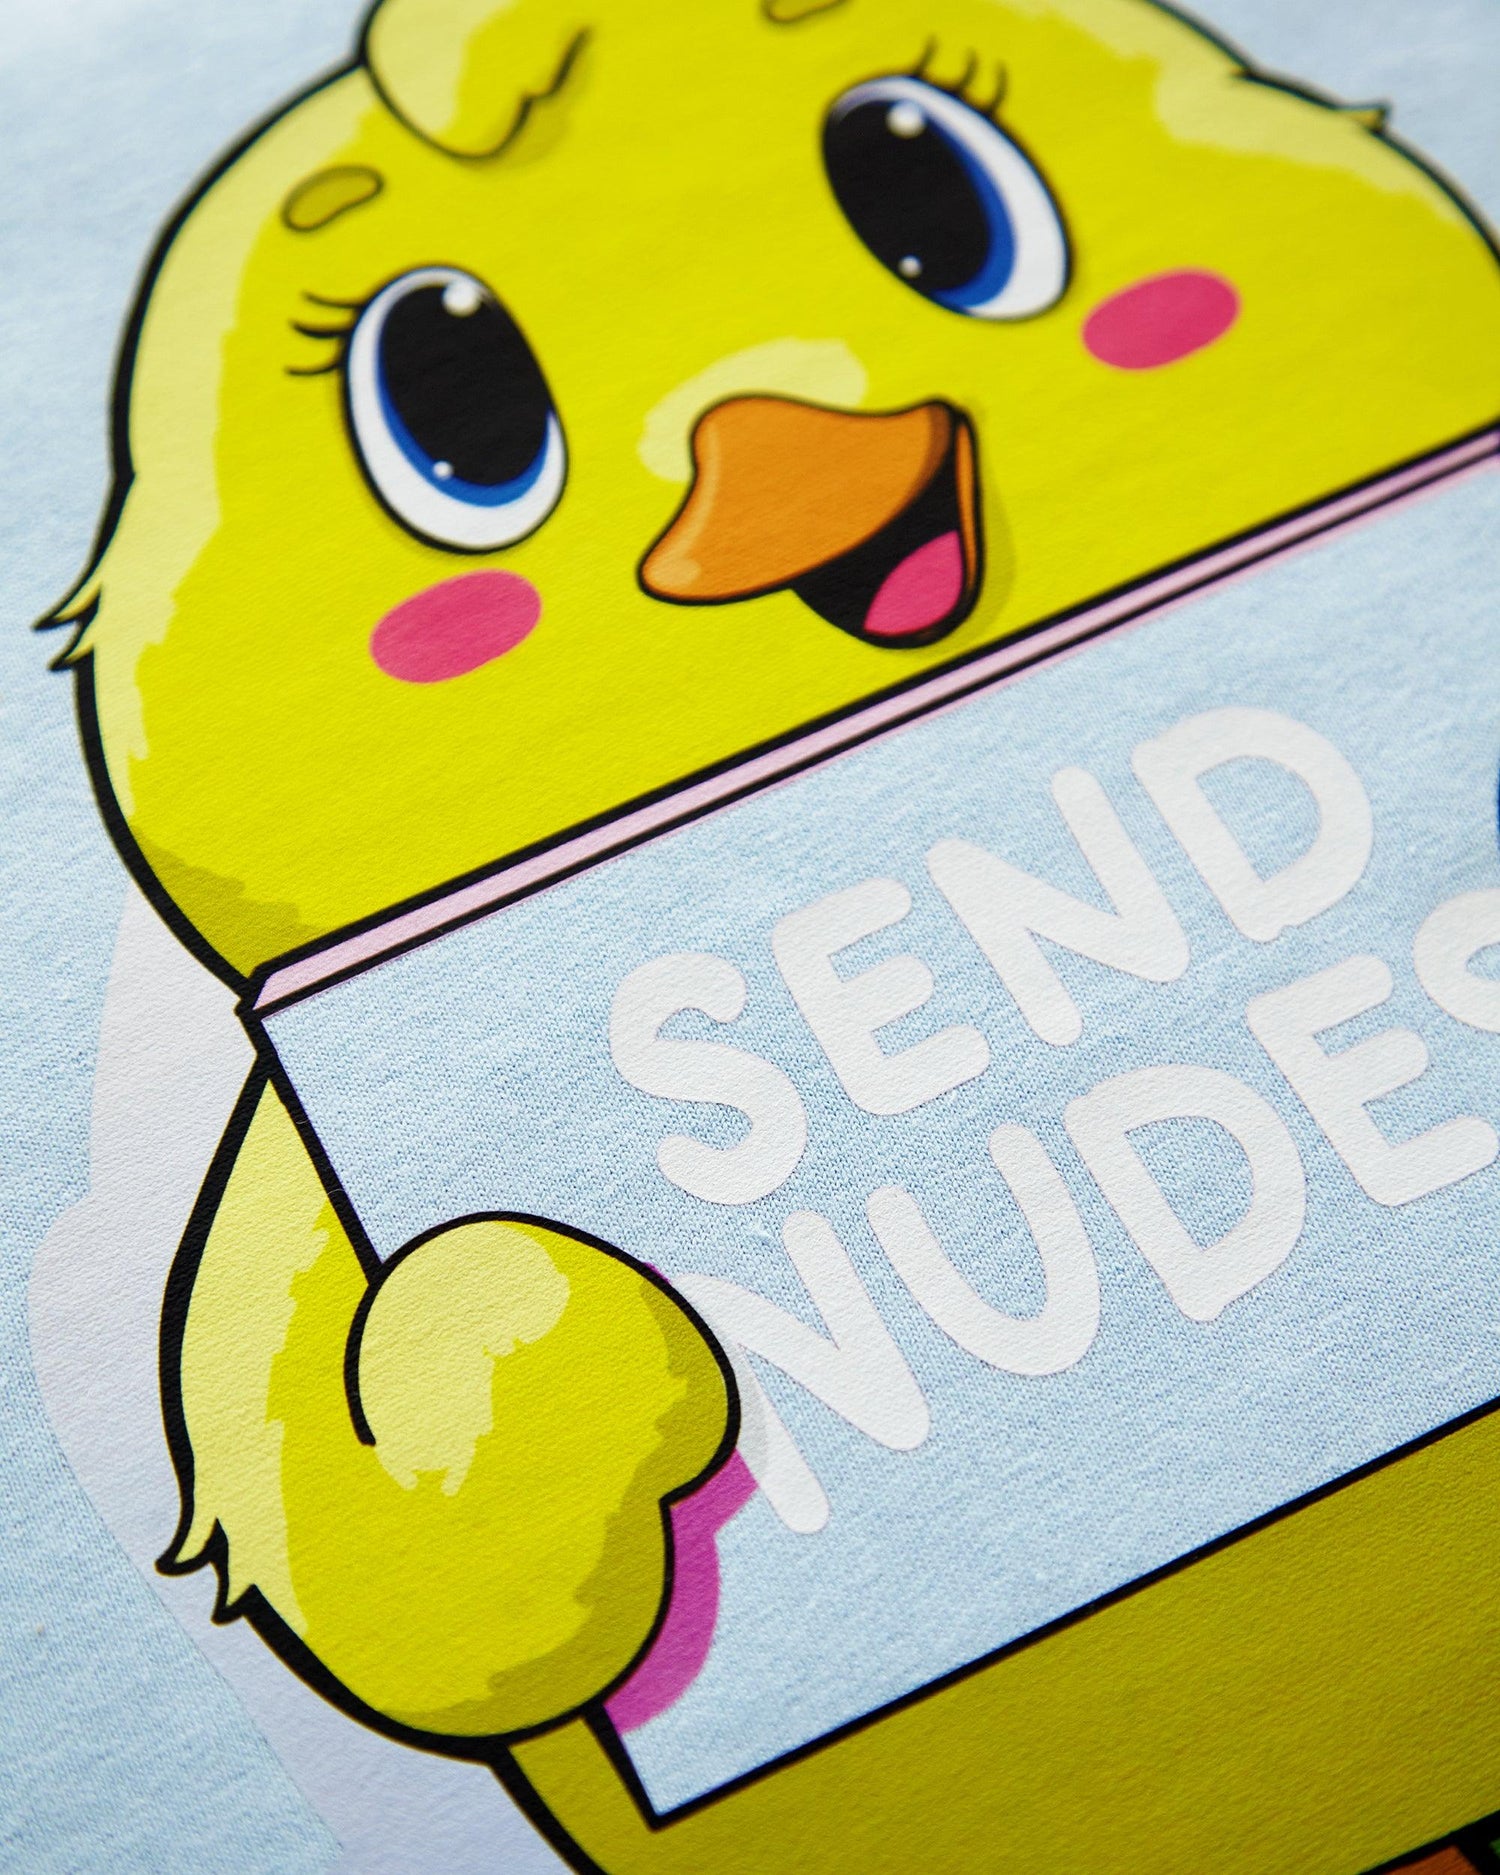 Cheeky duck, holding a sign on blue - mens cropped tee. - HOMOLONDON